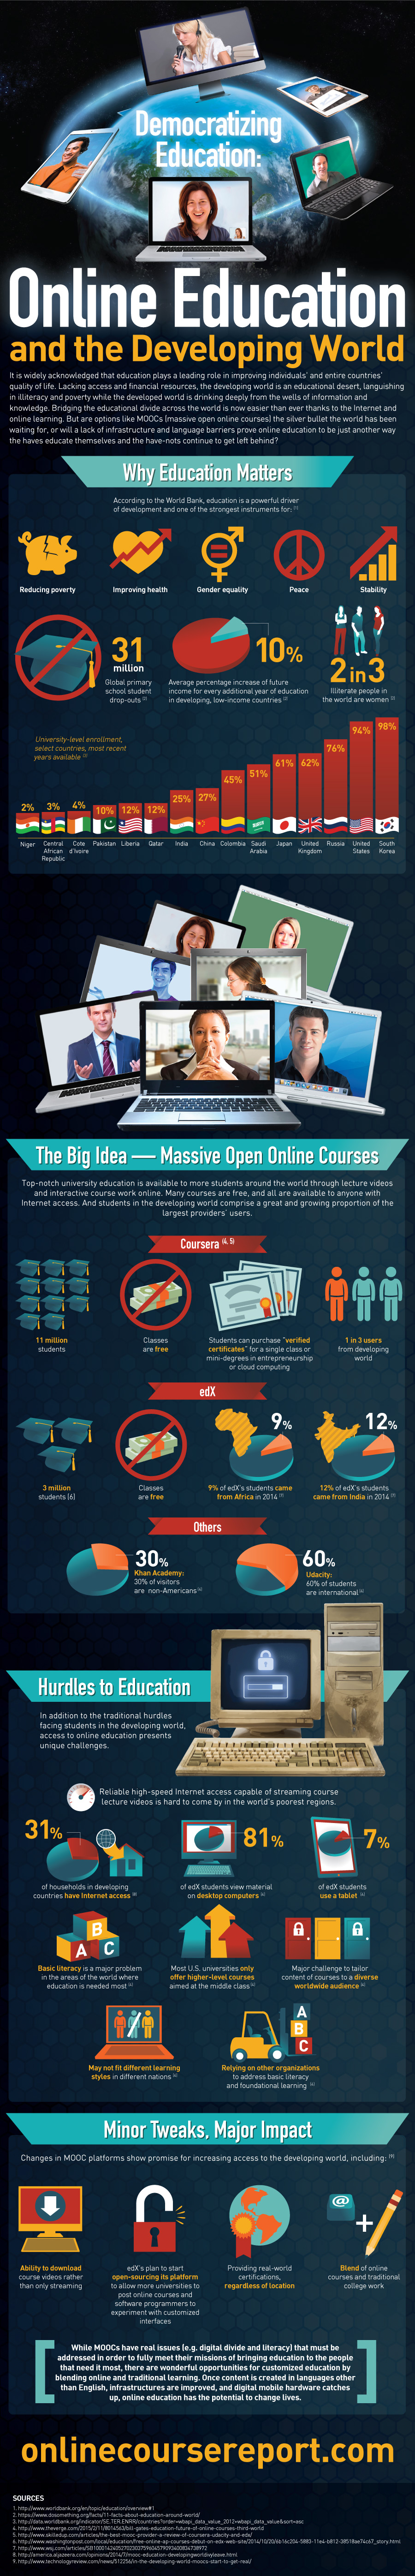 Online-Education infographic